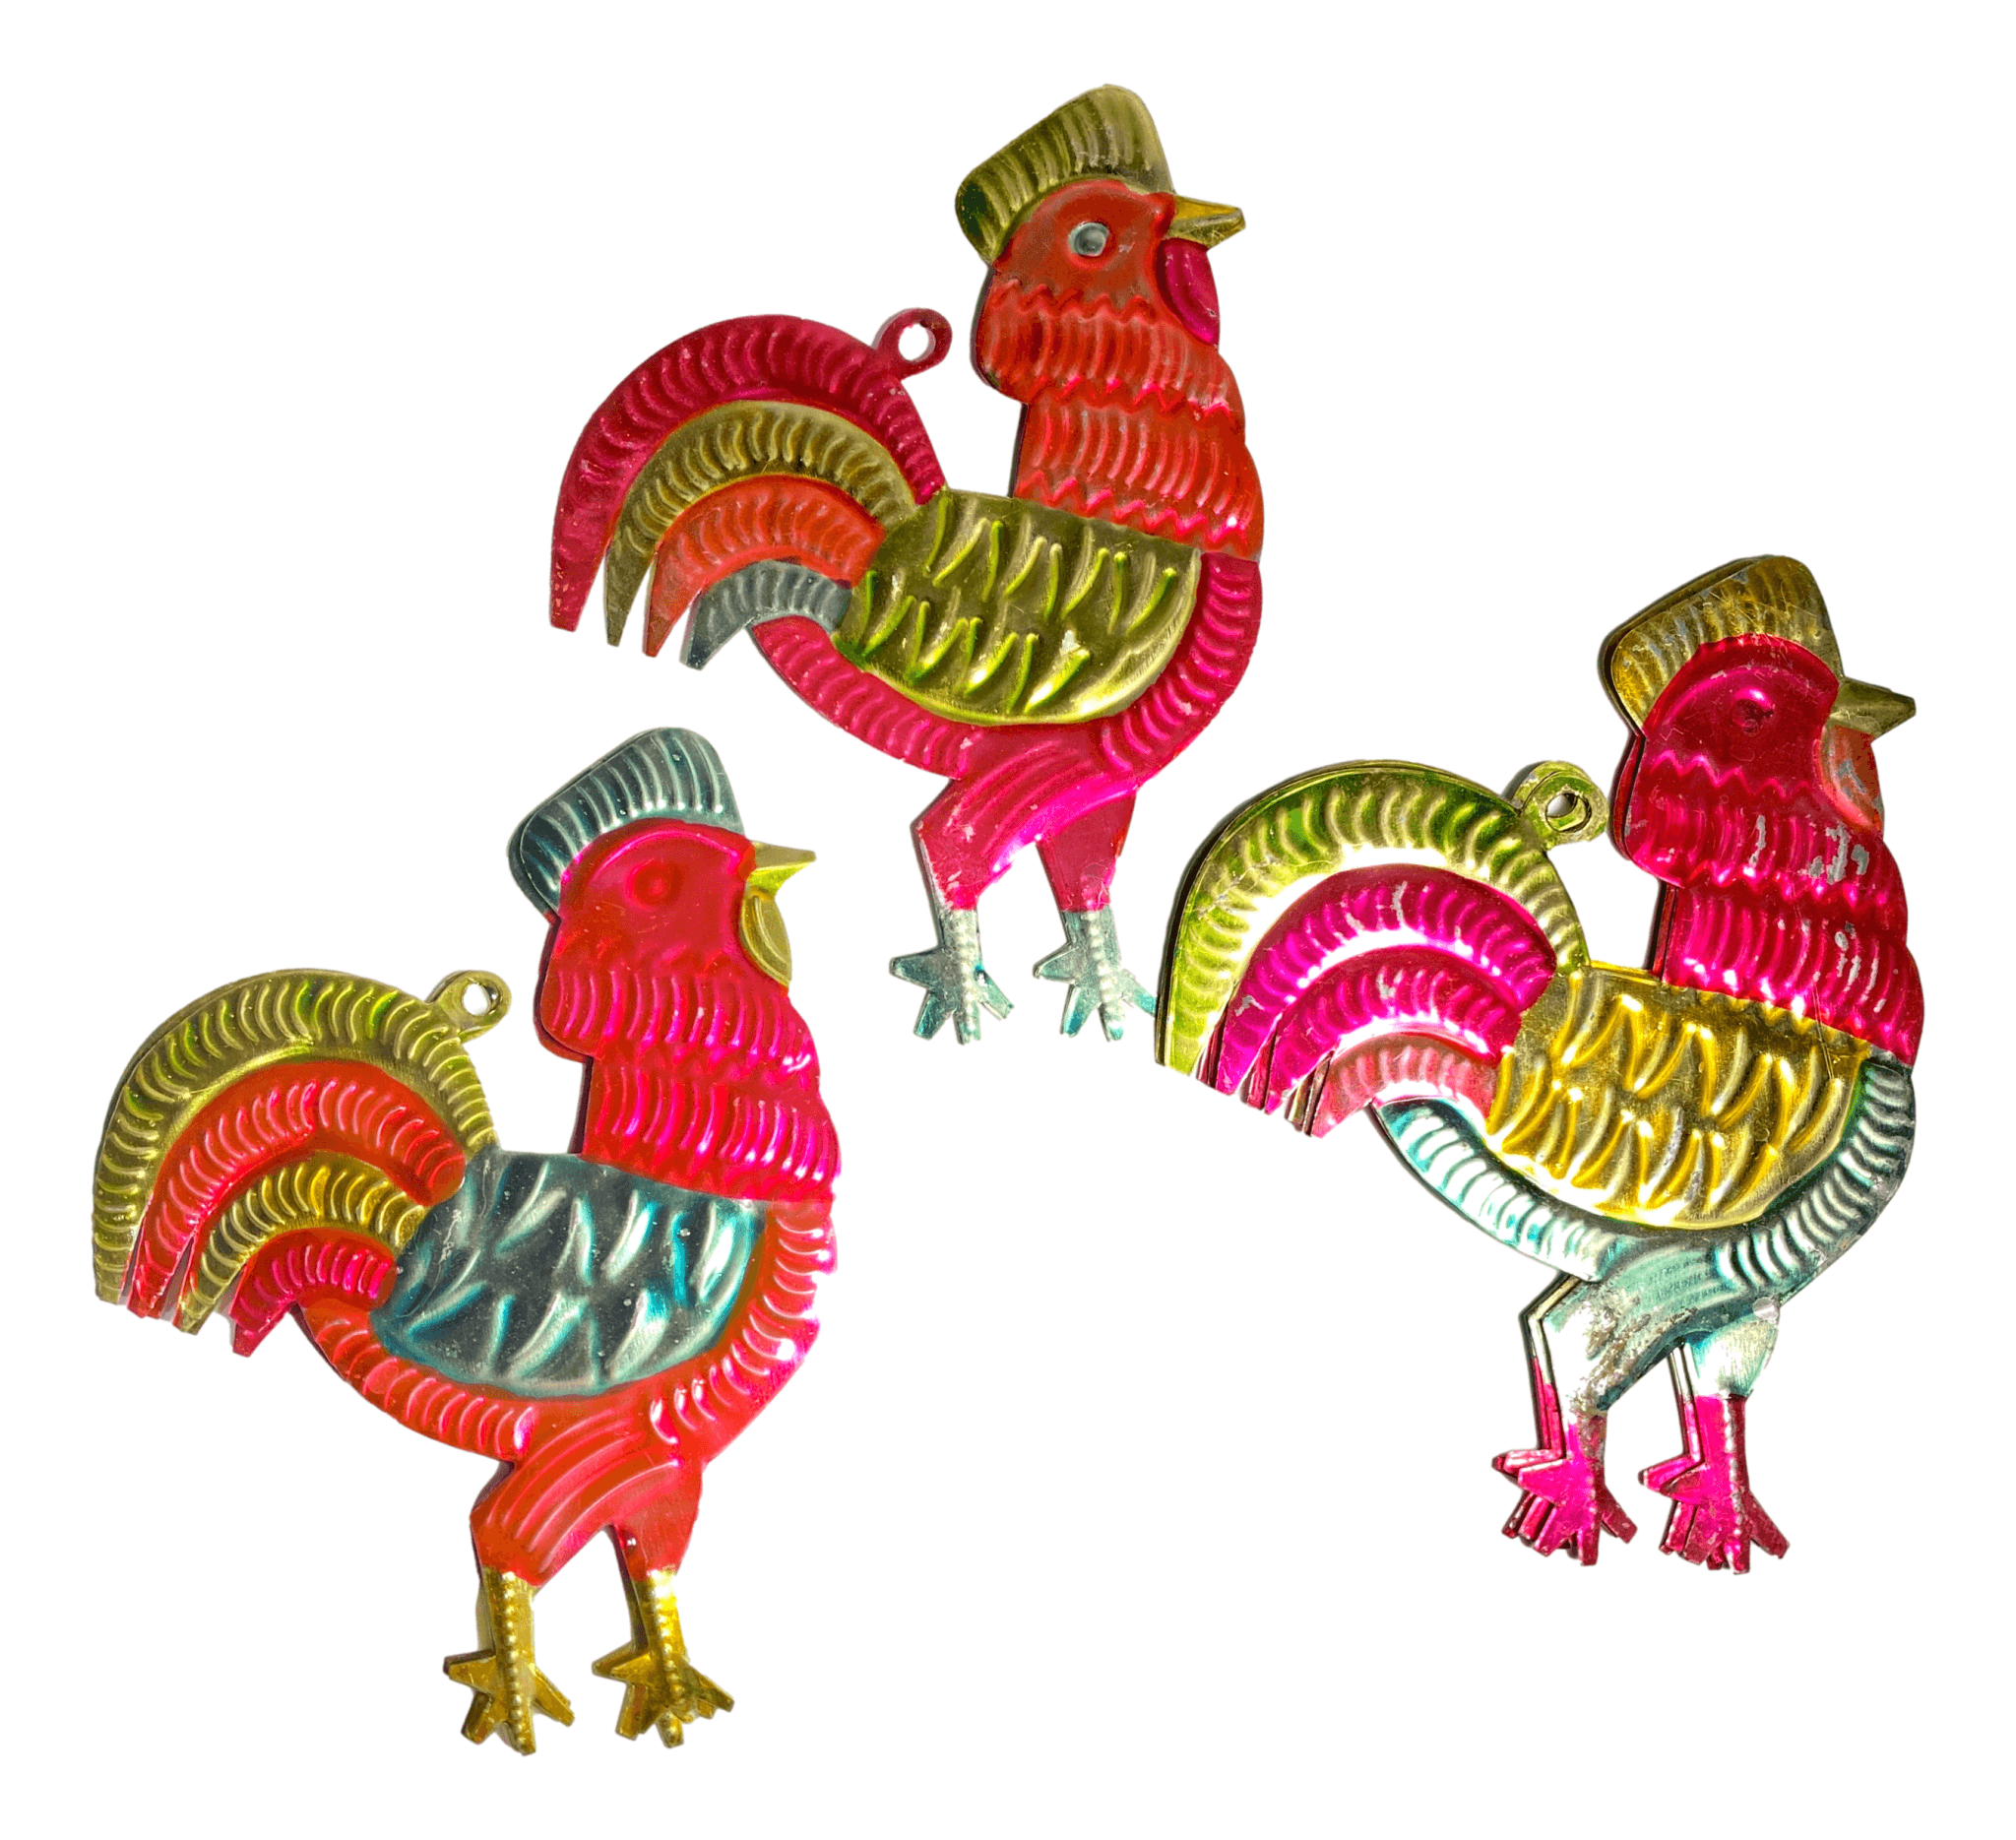 Ornament Colorful Tin Rooster Handcrafted by Mexican Artisan 5 L x 4 1/2 W Inches - Ysleta Mission Gift Shop- VOTED El Paso's Best Gift Shop